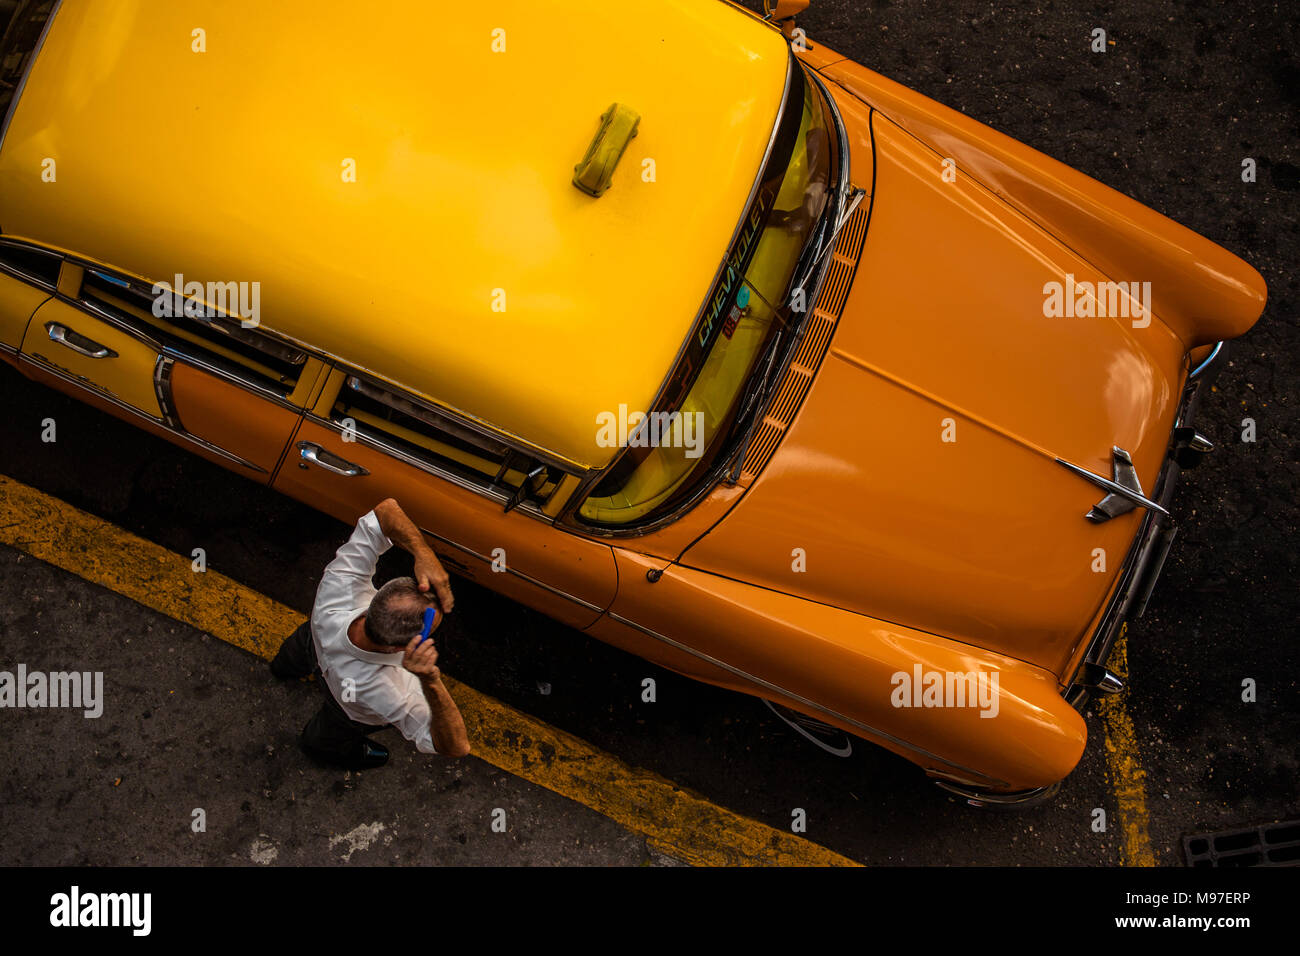 A taxi driver combs his hair while waiting for his customer to arrive, Havana, Cuba. Stock Photo